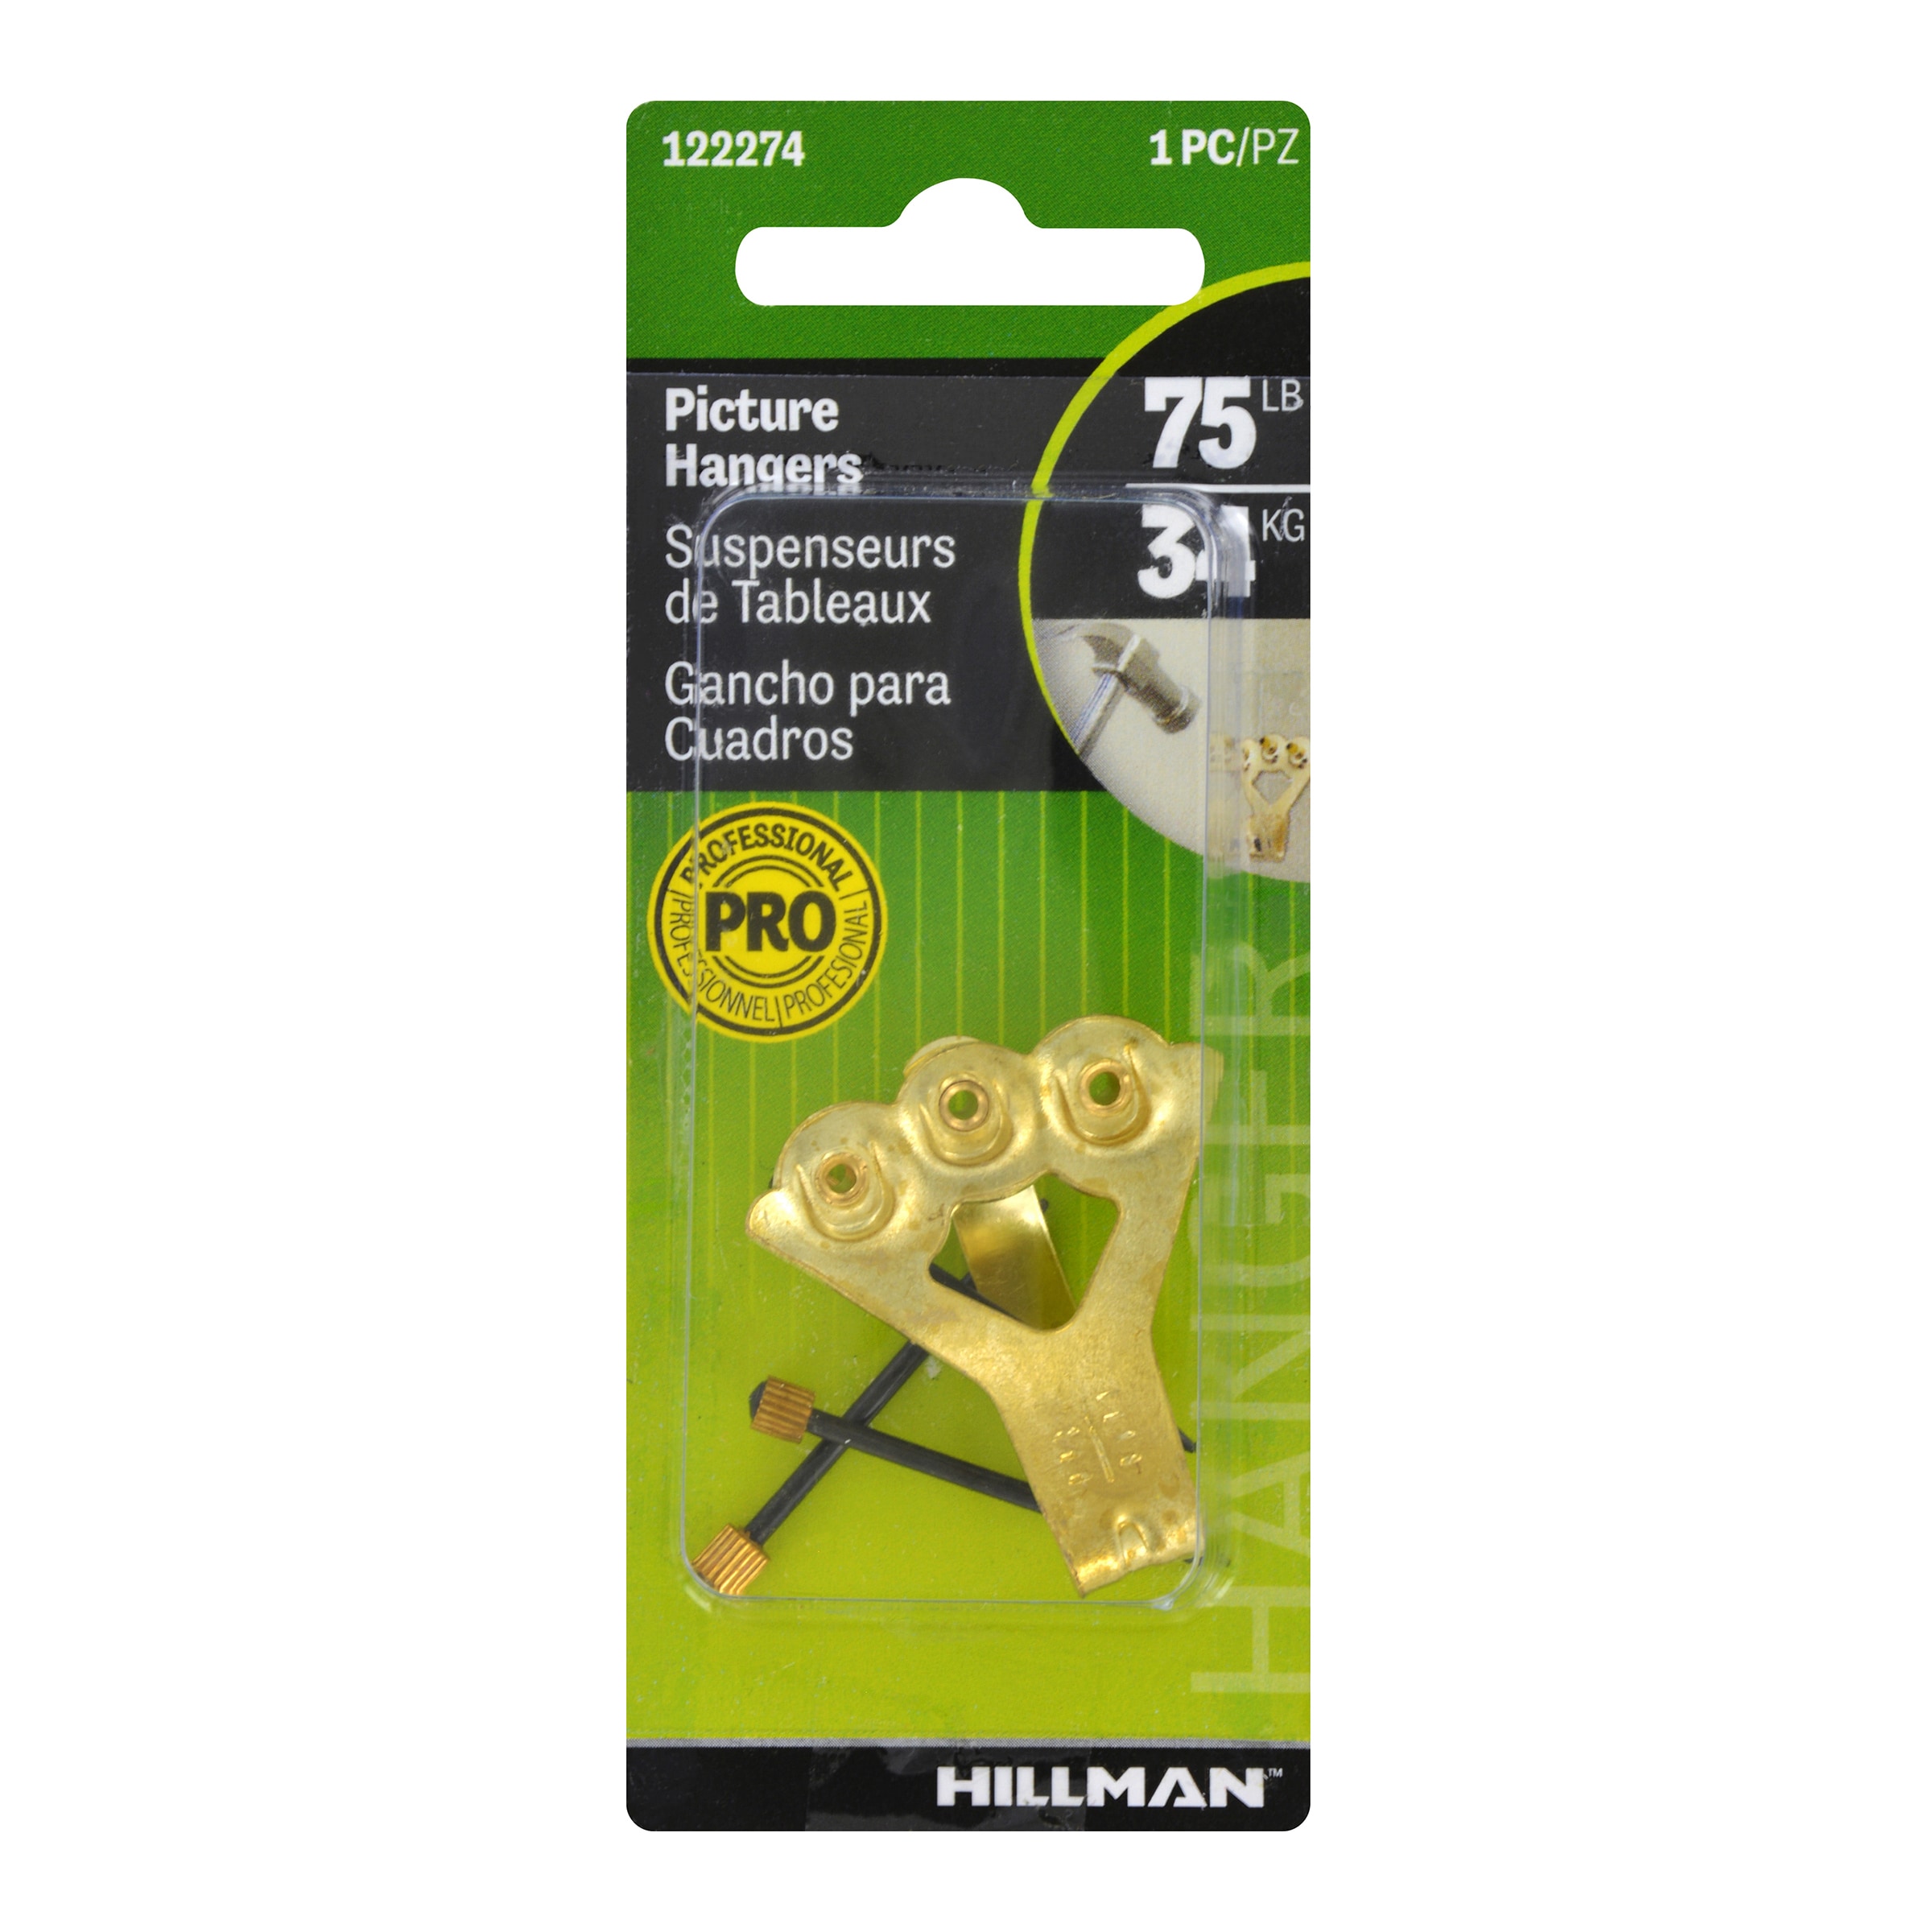 Hillman Picture Hanger Holds 75 Lbs in the Picture Hangers